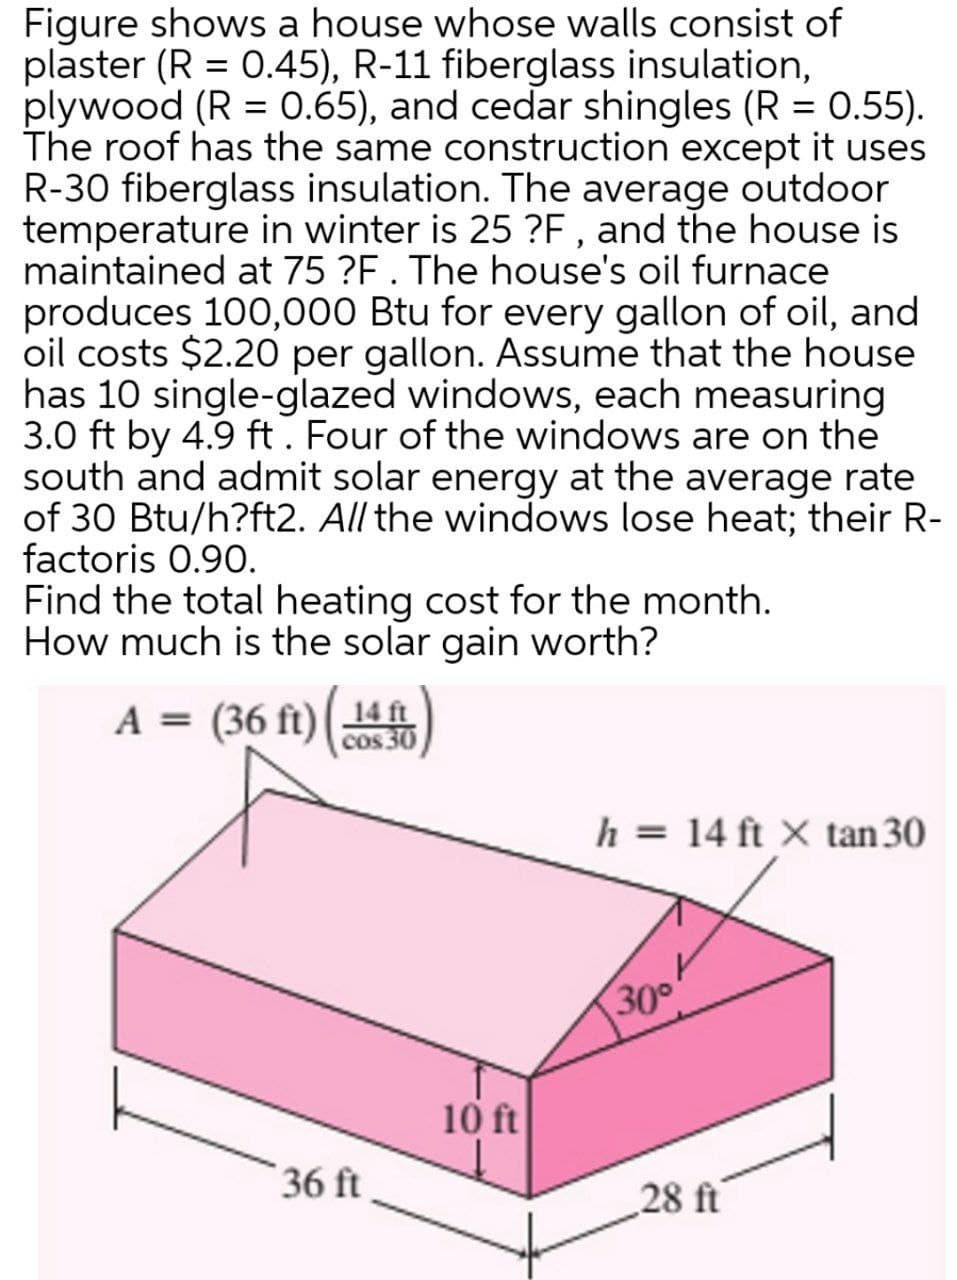 Figure shows a house whose walls consist of
plaster (R = 0.45), R-11 fiberglass insulation,
plywood (R = 0.65), and cedar shingles (R = 0.55).
The roof has the same construction except it uses
R-30 fiberglass insulation. The average outdoor
temperature in winter is 25 ?F , and the house is
maintained at 75 ?F. The house's oil furnace
produces 100,000 Btu for every gallon of oil, and
oil costs $2.20 per gallon. Assume that the house
has 10 single-glazed windows, each measuring
3.0 ft by 4.9 ft. Four of the windows are on the
south and admit solar energy at the average rate
of 30 Btu/h?ft2. All the windows lose heat; their R-
factoris 0.90.
Find the total heating cost for the month.
How much is the solar gain worth?
A = (36 ft)(14
cos 30
h = 14 ft X tan 30
300
10 ft
36 ft
28 ft
